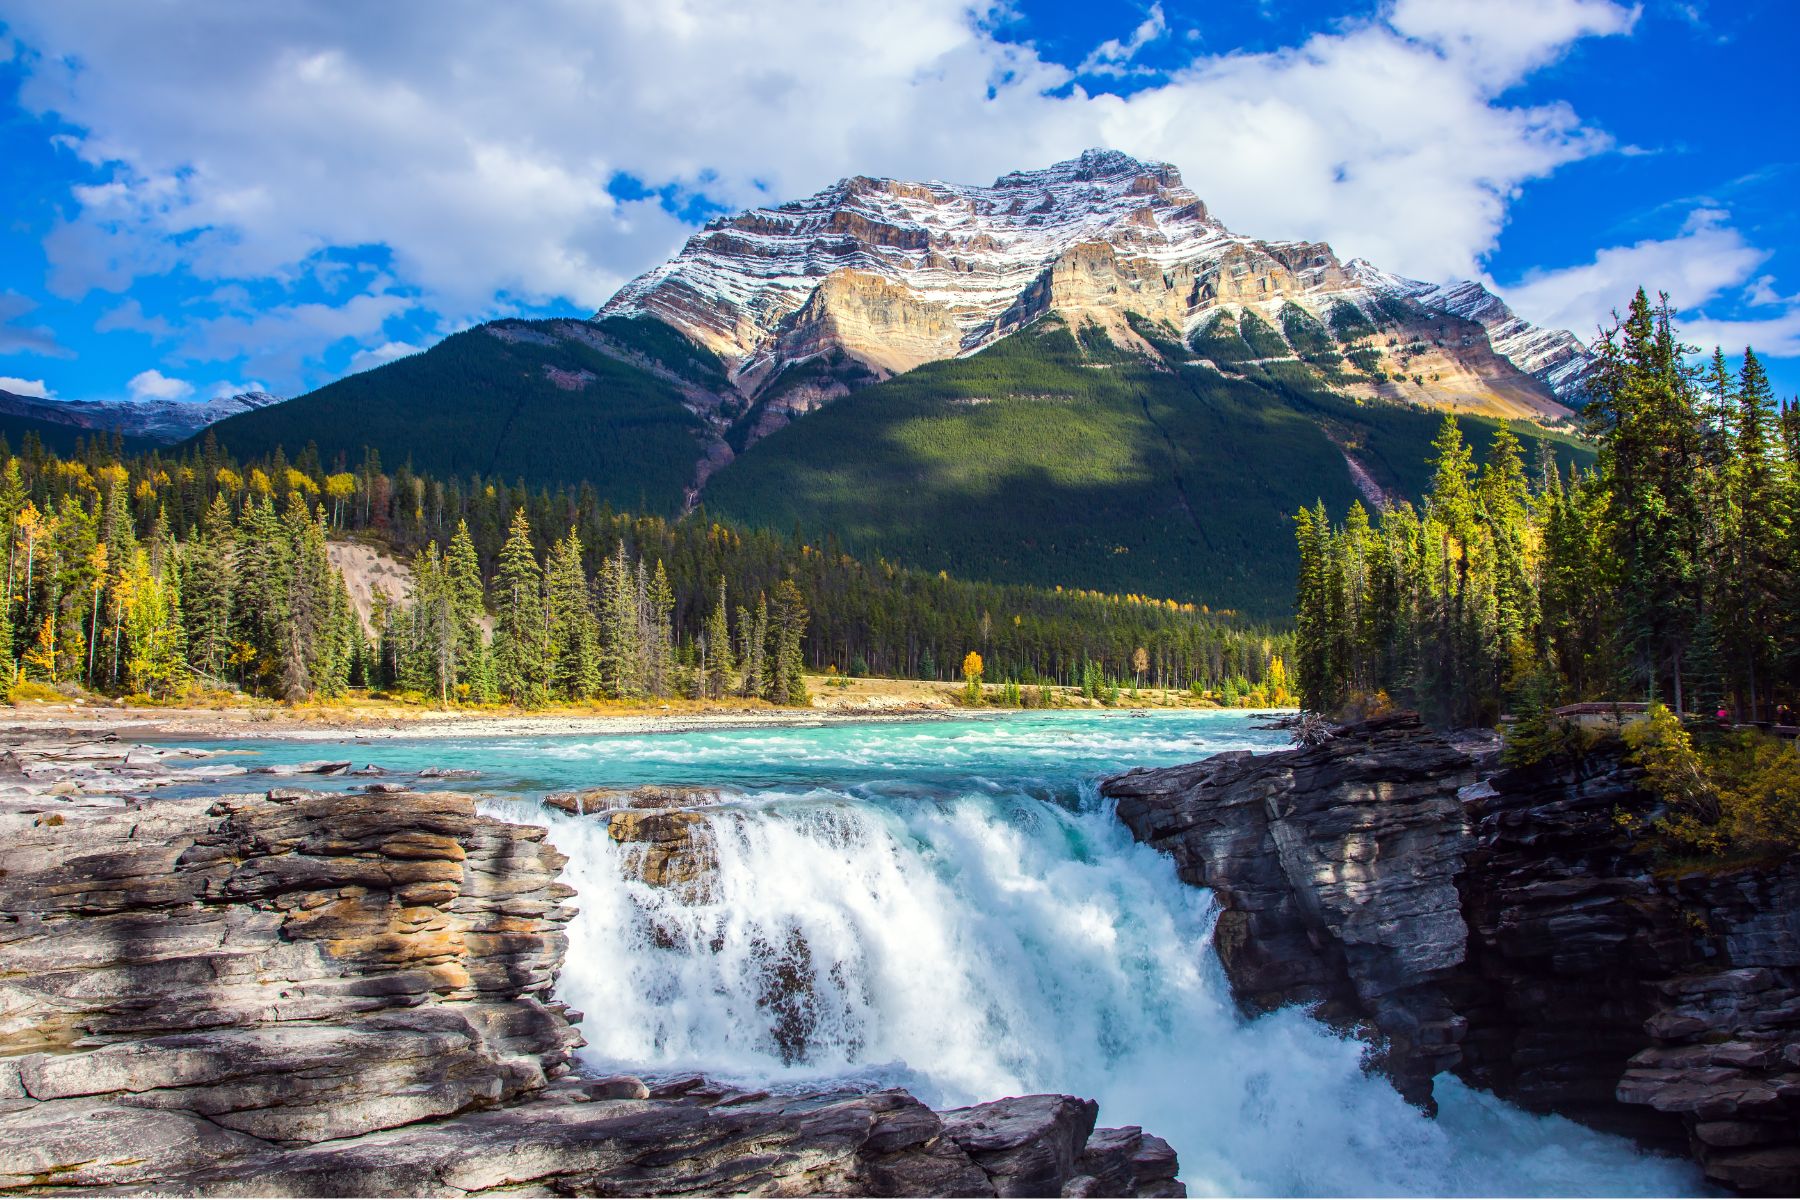 All You Need To Know About Athabasca Falls